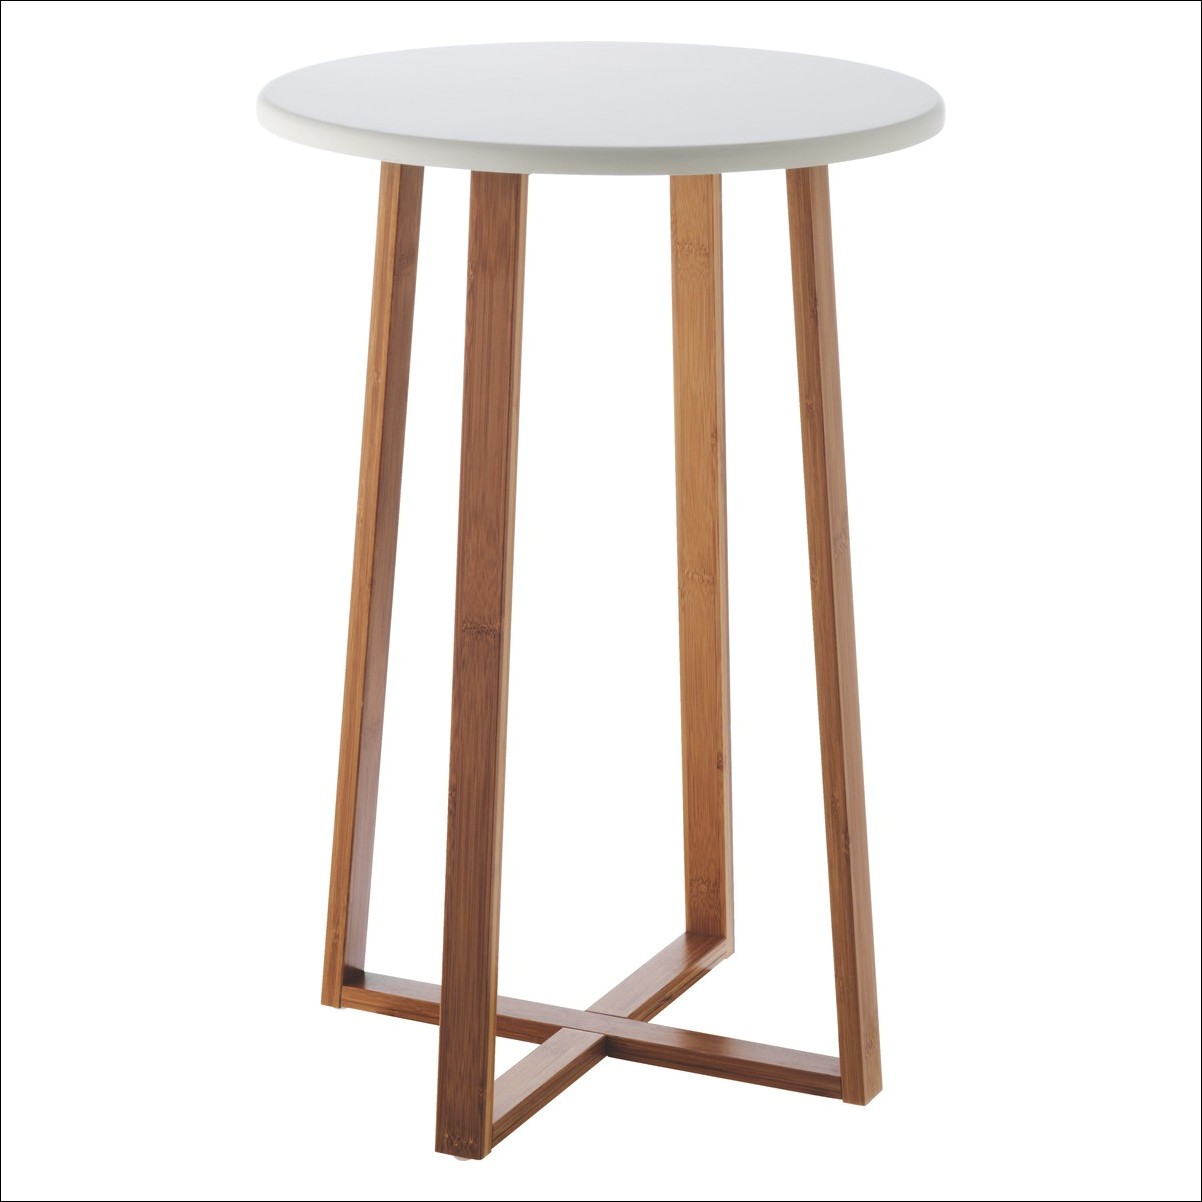 coffee accent tables space efficient tall skinny end white floor lamp round outdoor table silver country argos chairs plywood grain kitchen decor futon convertible rustic wood